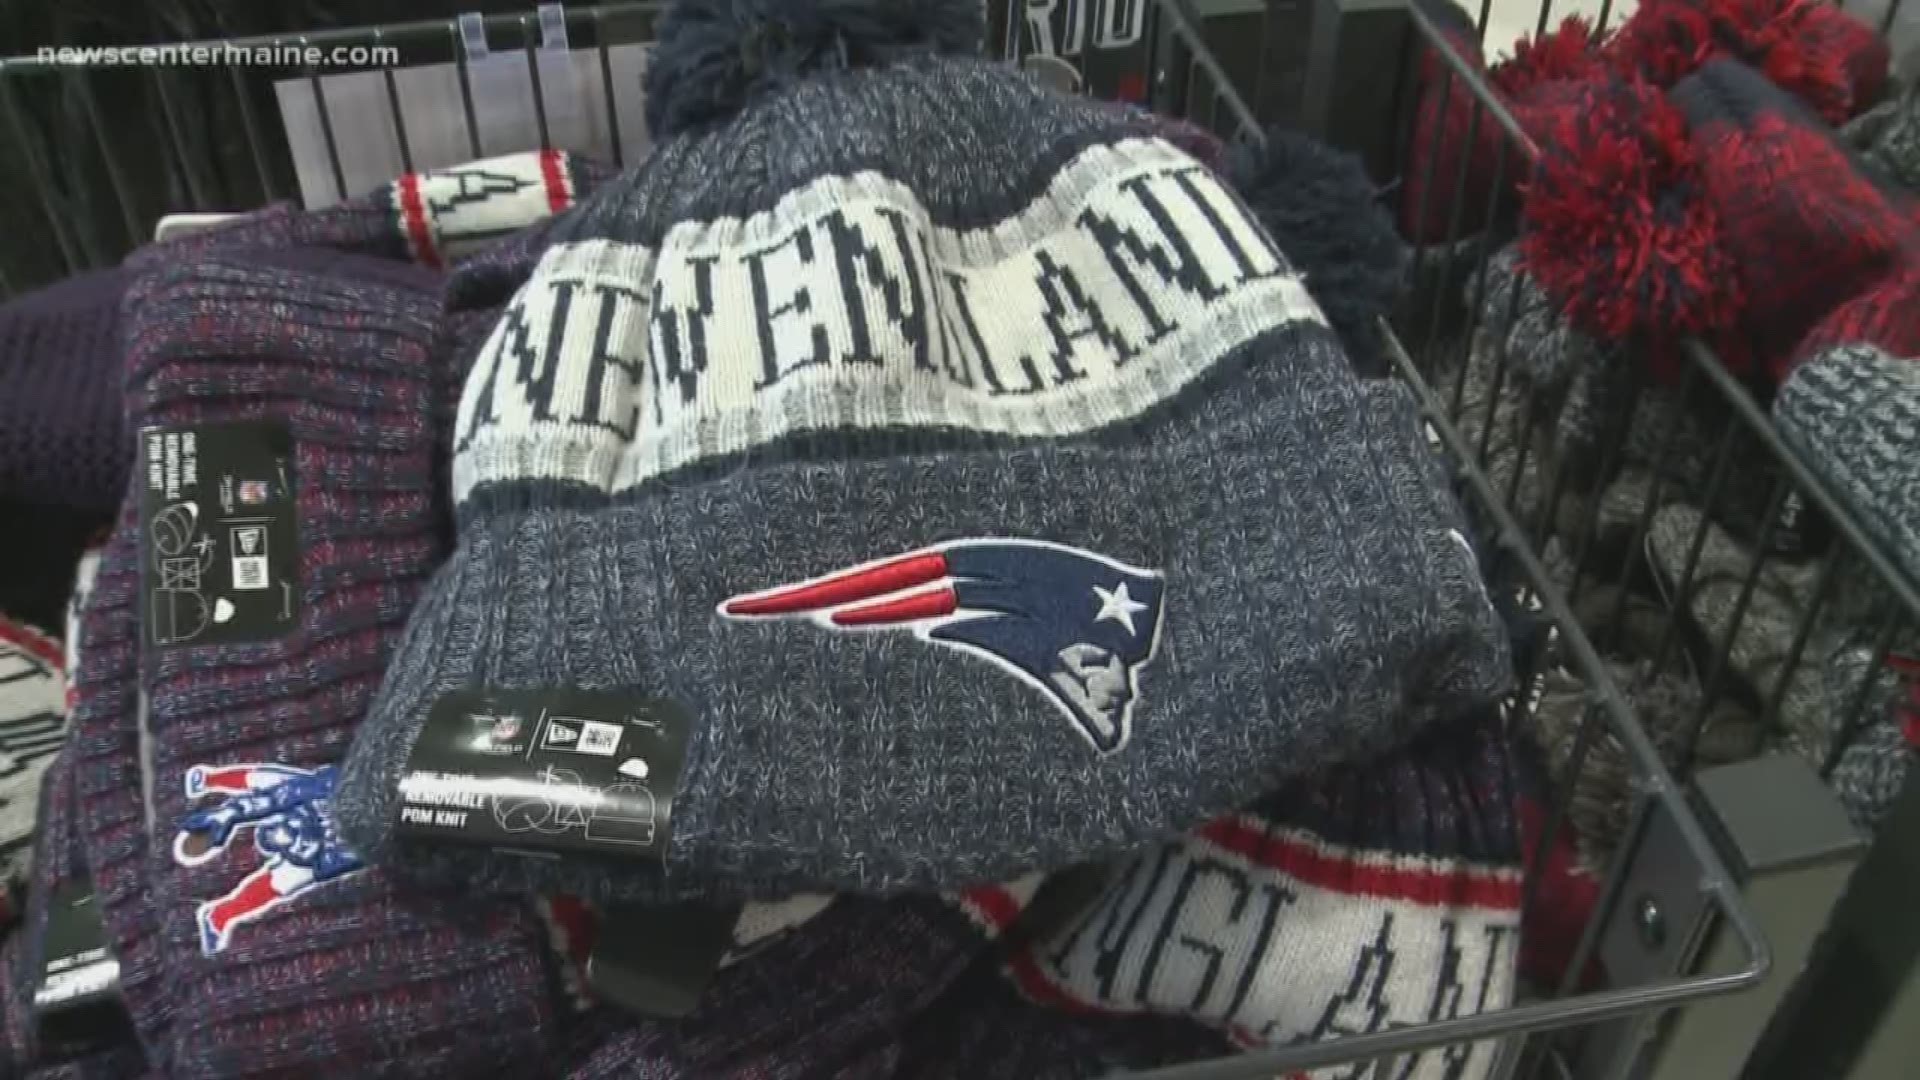 New England Patriots fans stock up on AFC gear after the team's win in Sunday night's game against the Kansas City Chiefs.